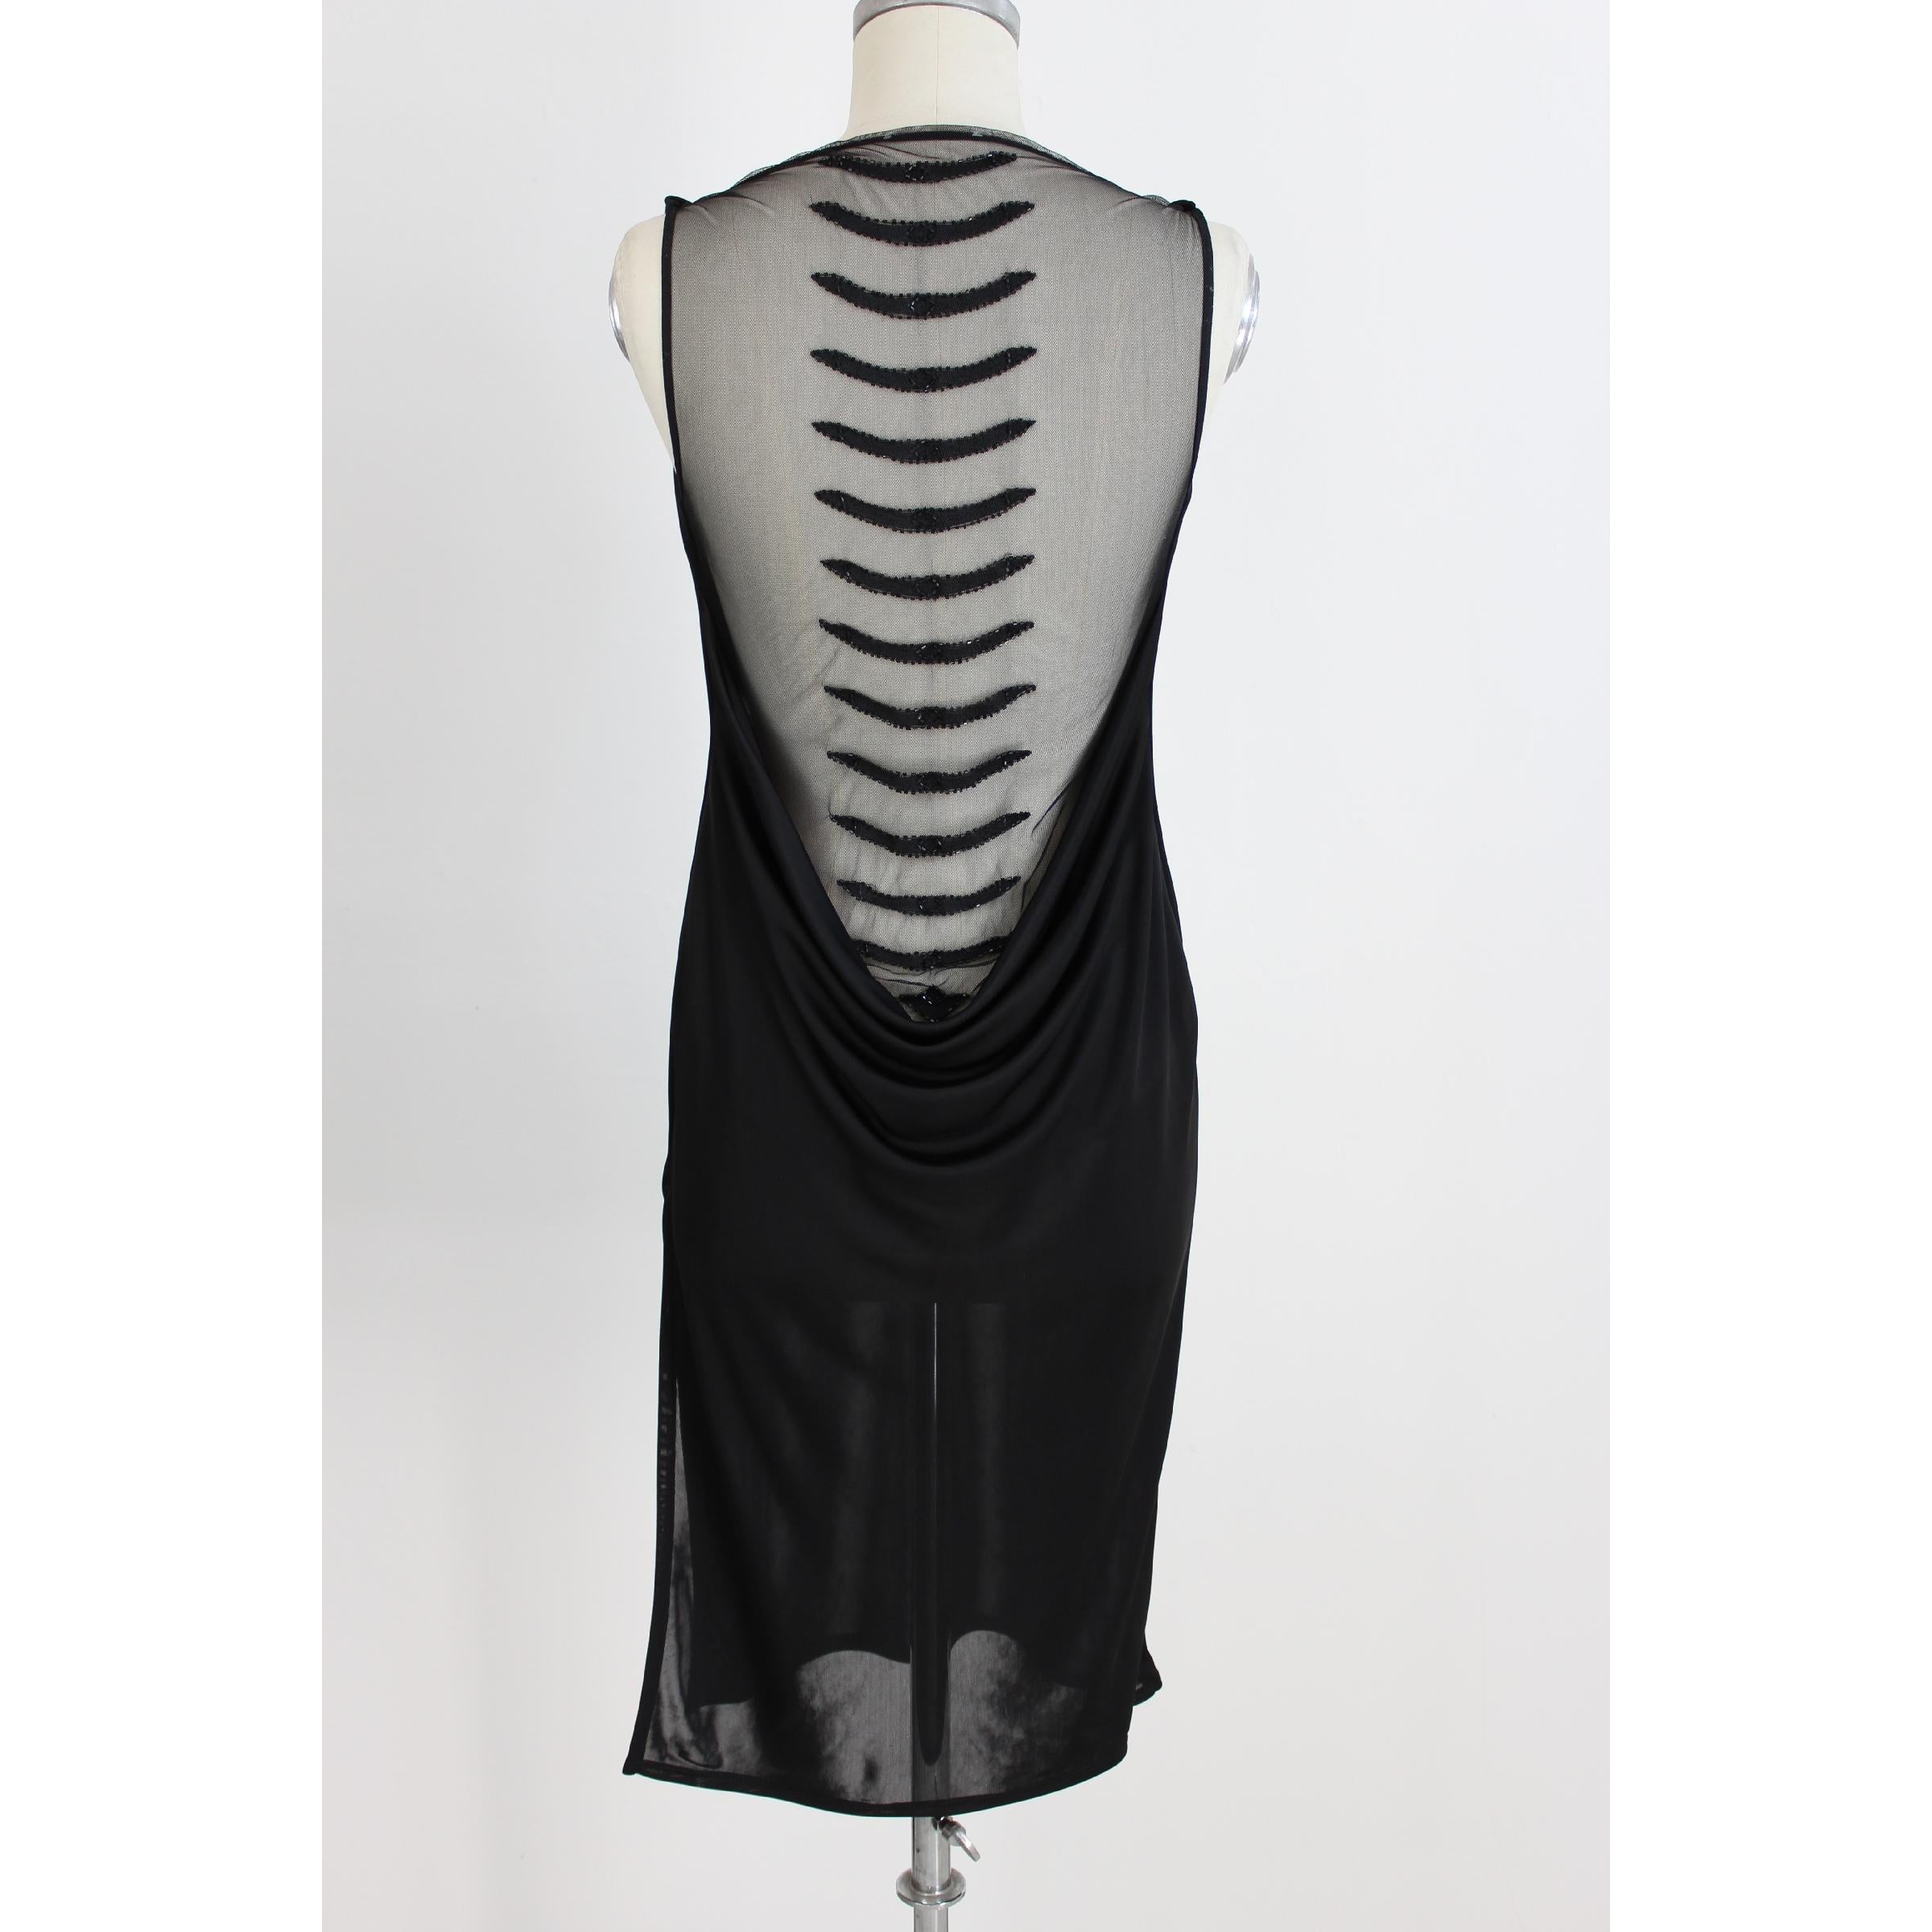 Richmond long evening dress for women. Black colour. Strapless dress with soft neckline, along the back deep necklines with transparencies and plays of black sequins. The neckline along the back measures 55 cm. Made in Italy. Excellent vintage